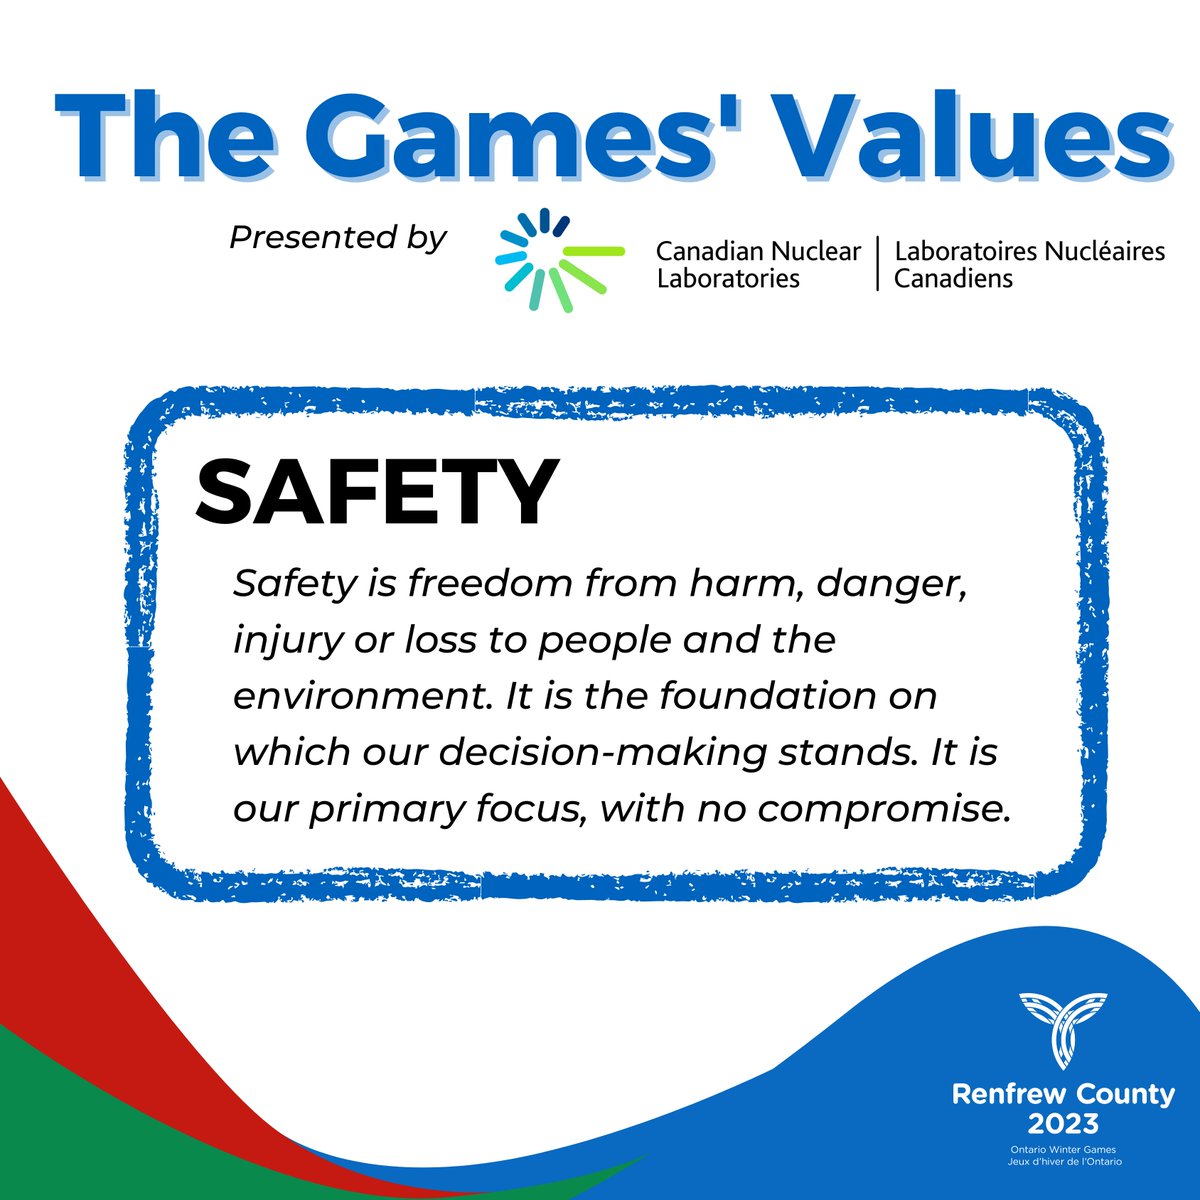 The Games’ Values mean staying safe in sport and in life with no compromise. Thank you to our partner @CNL_LNC for sharing their values, and always making safety a key priority. 
For more information on what the @CNL_LNC Games’ Values mean visit: countyofrenfrew.on.ca/en/news/renfre…